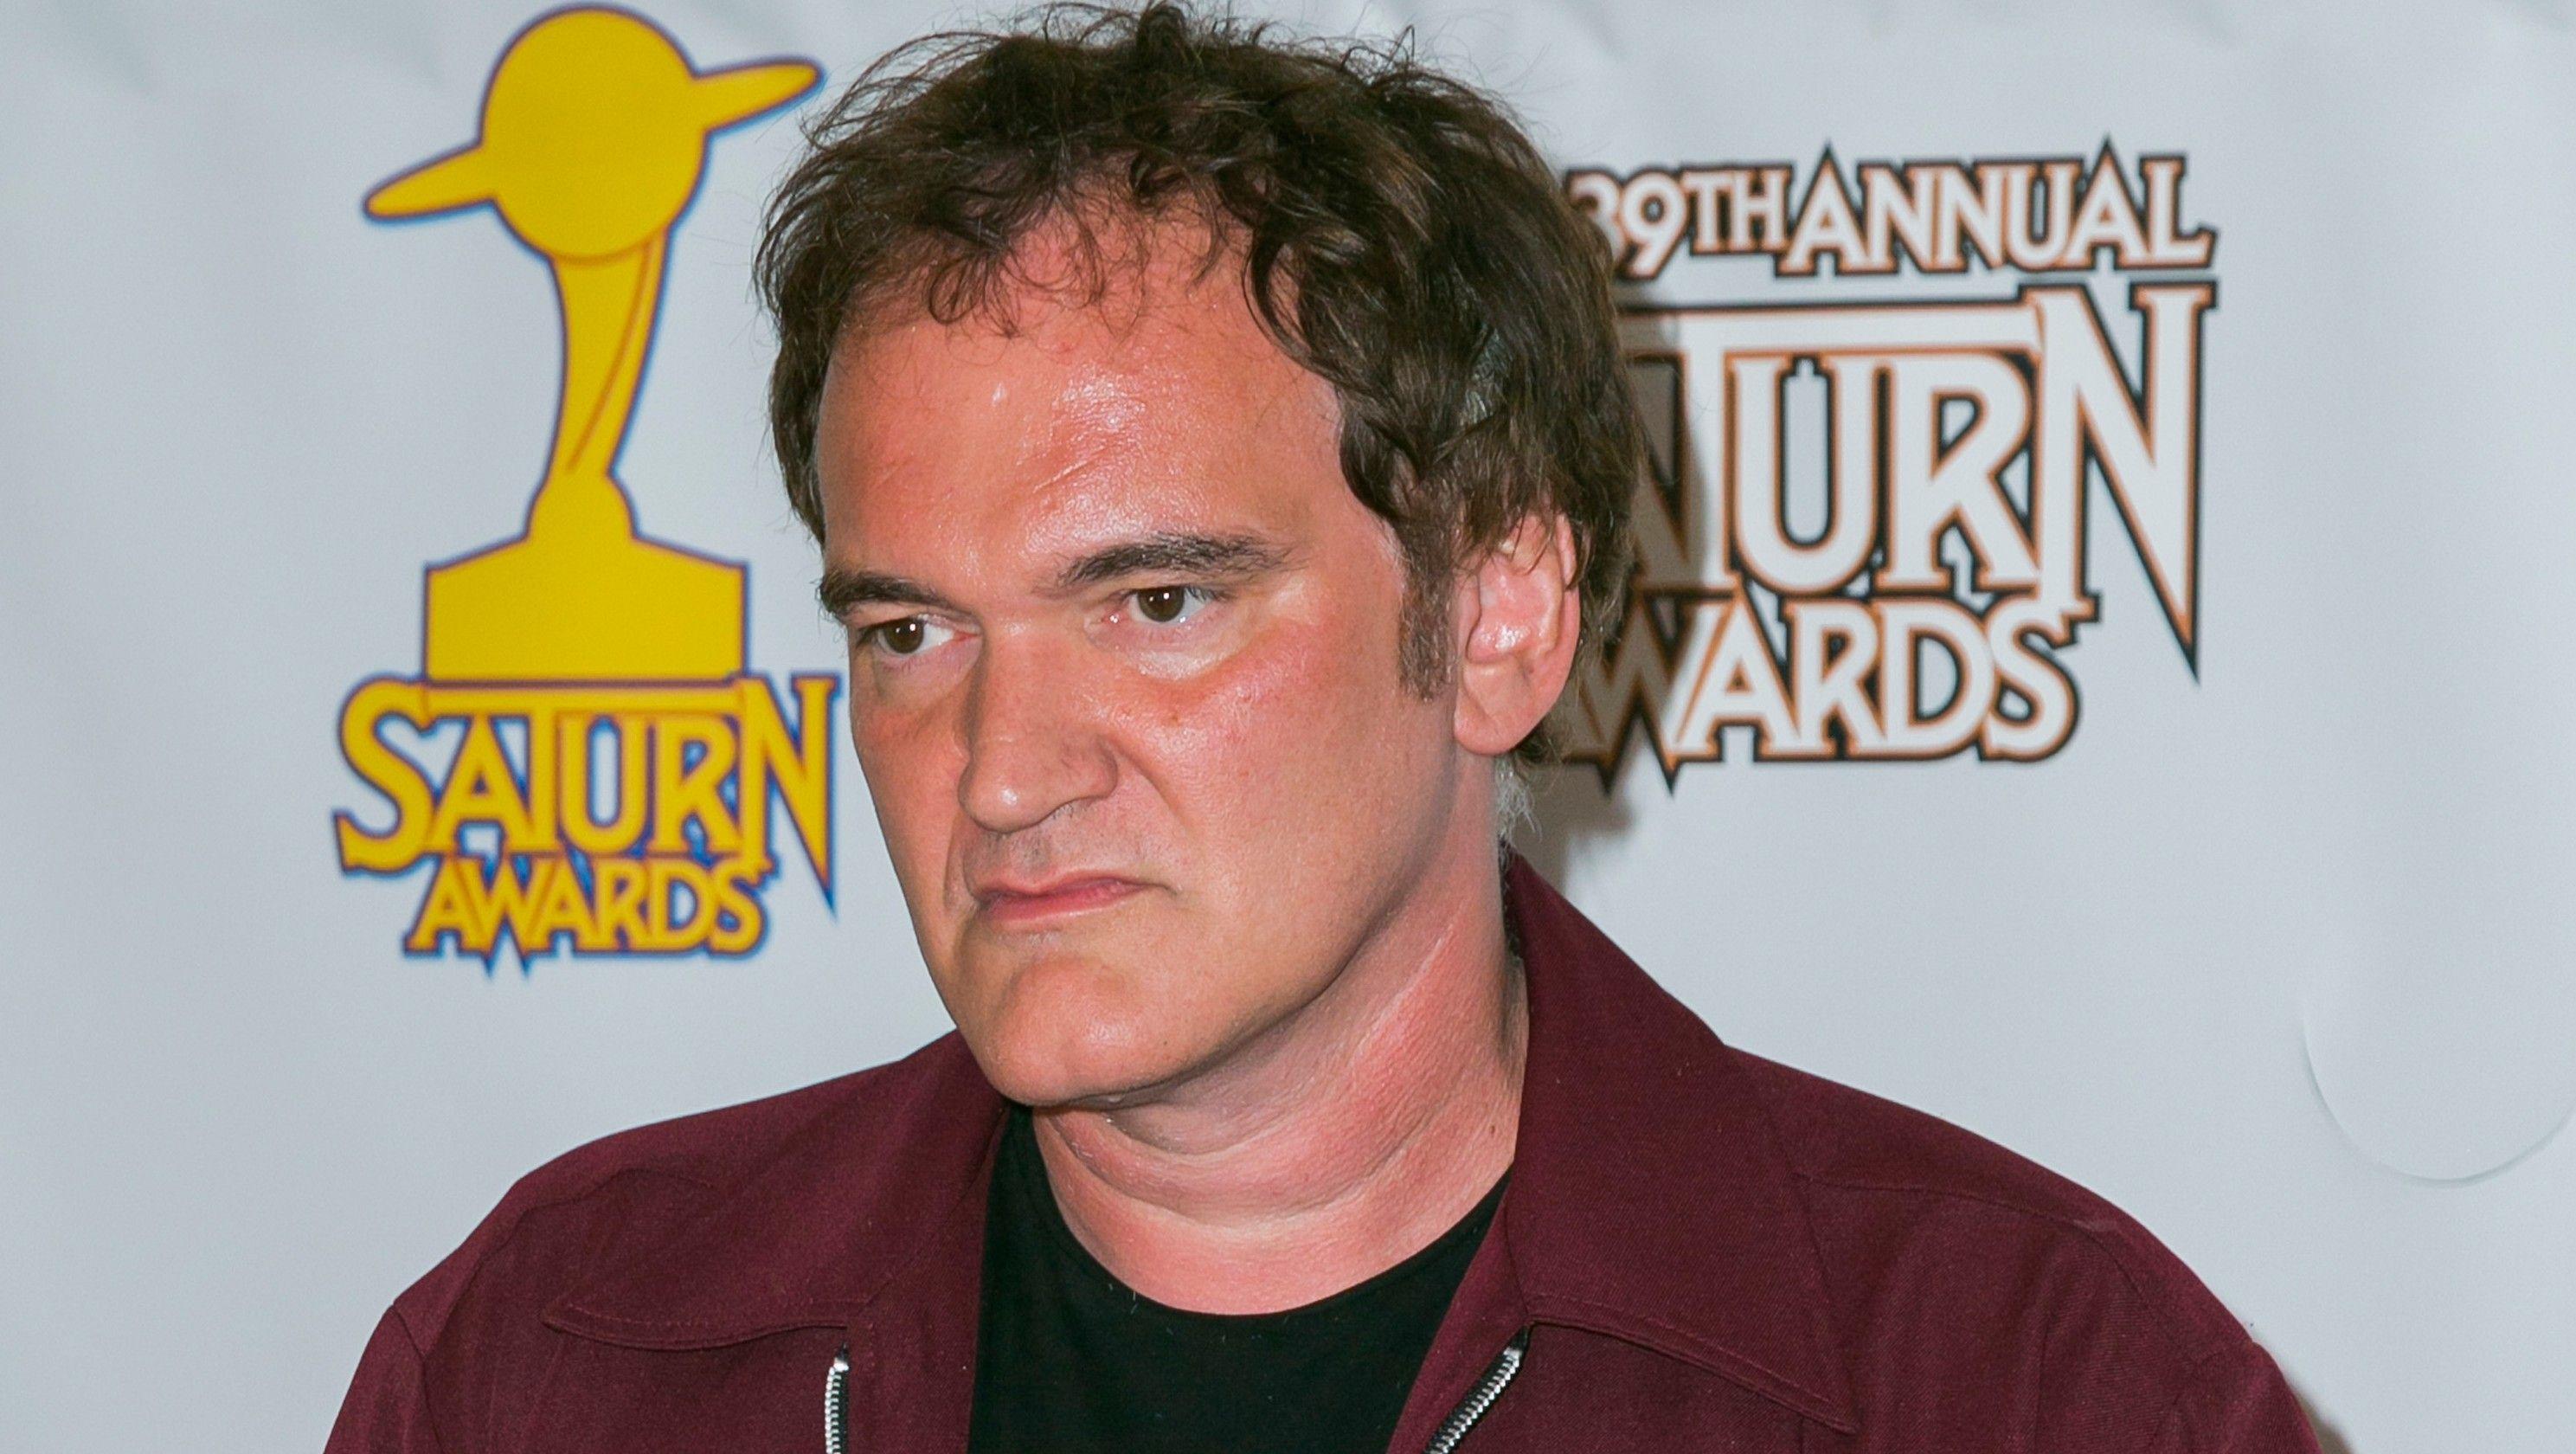 Quentin Tarantino Tables 'The Hateful Eight' After the Screenplay